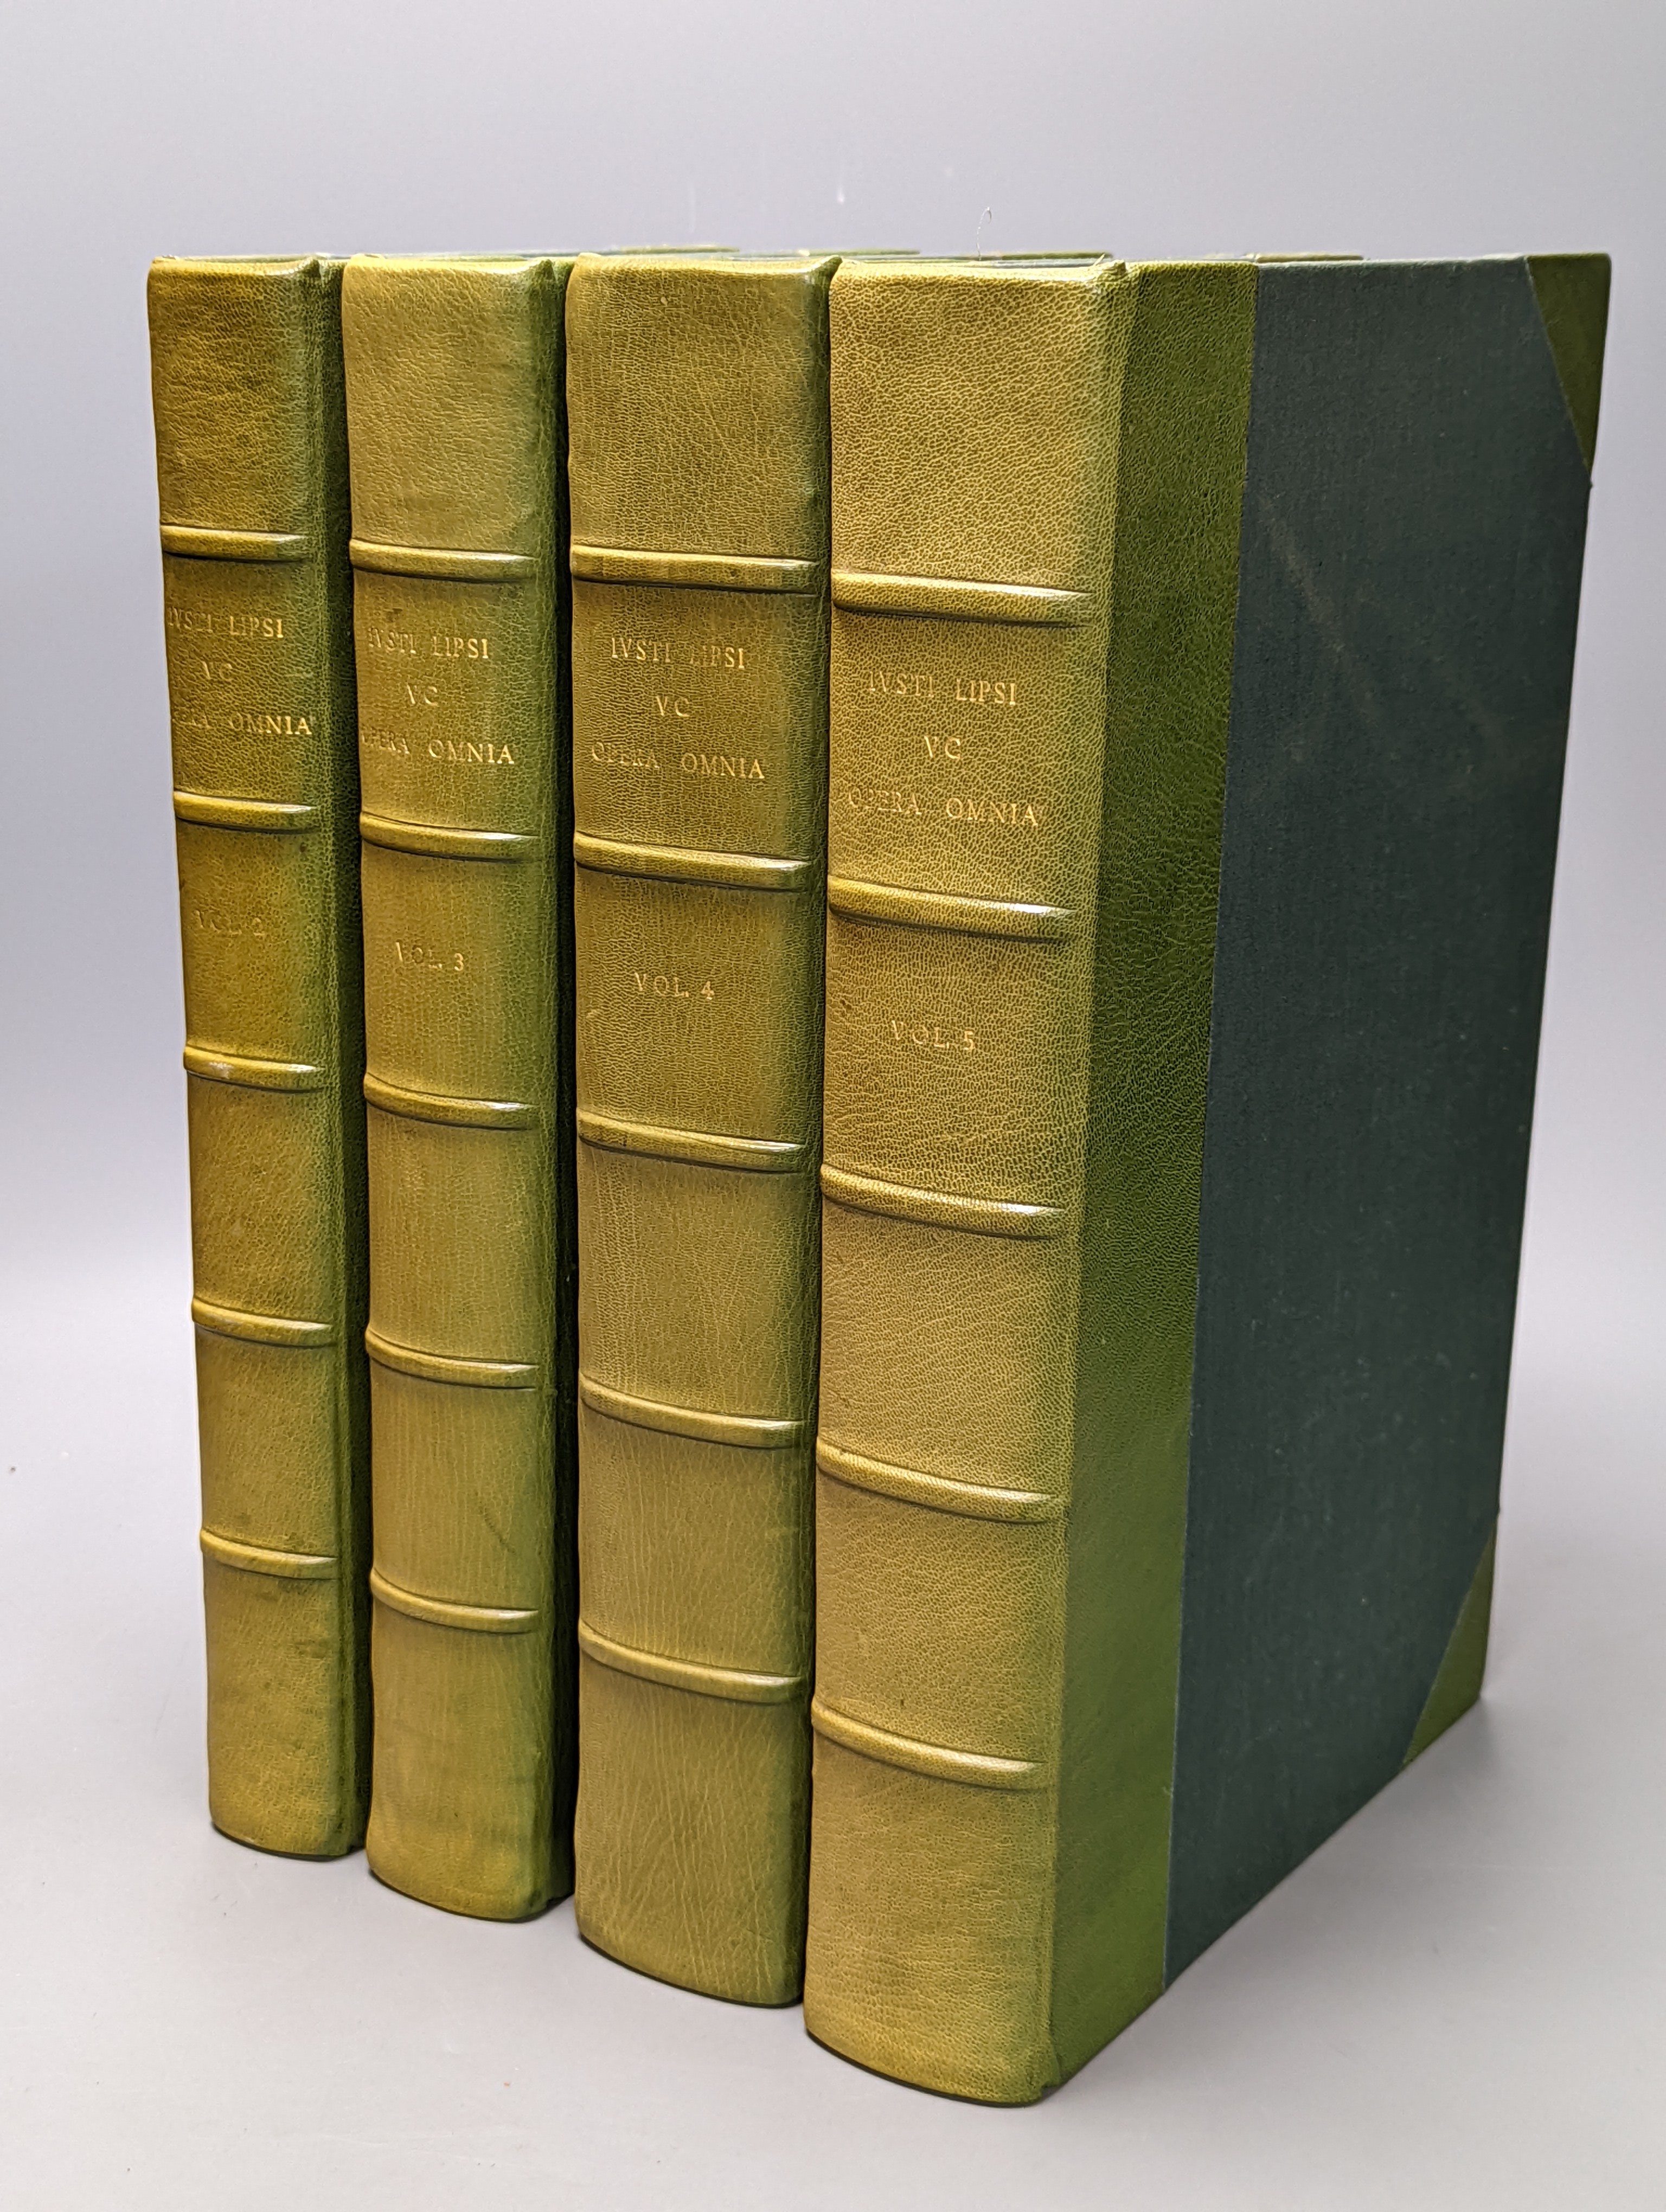 Lipsius, Justus - Opera Omnia ... 4 vols. some text engravings; recently rebound green half morocco and cloth, gilt-lettered and panelled spines, folio. Antwerp: ex officina Plantiniana